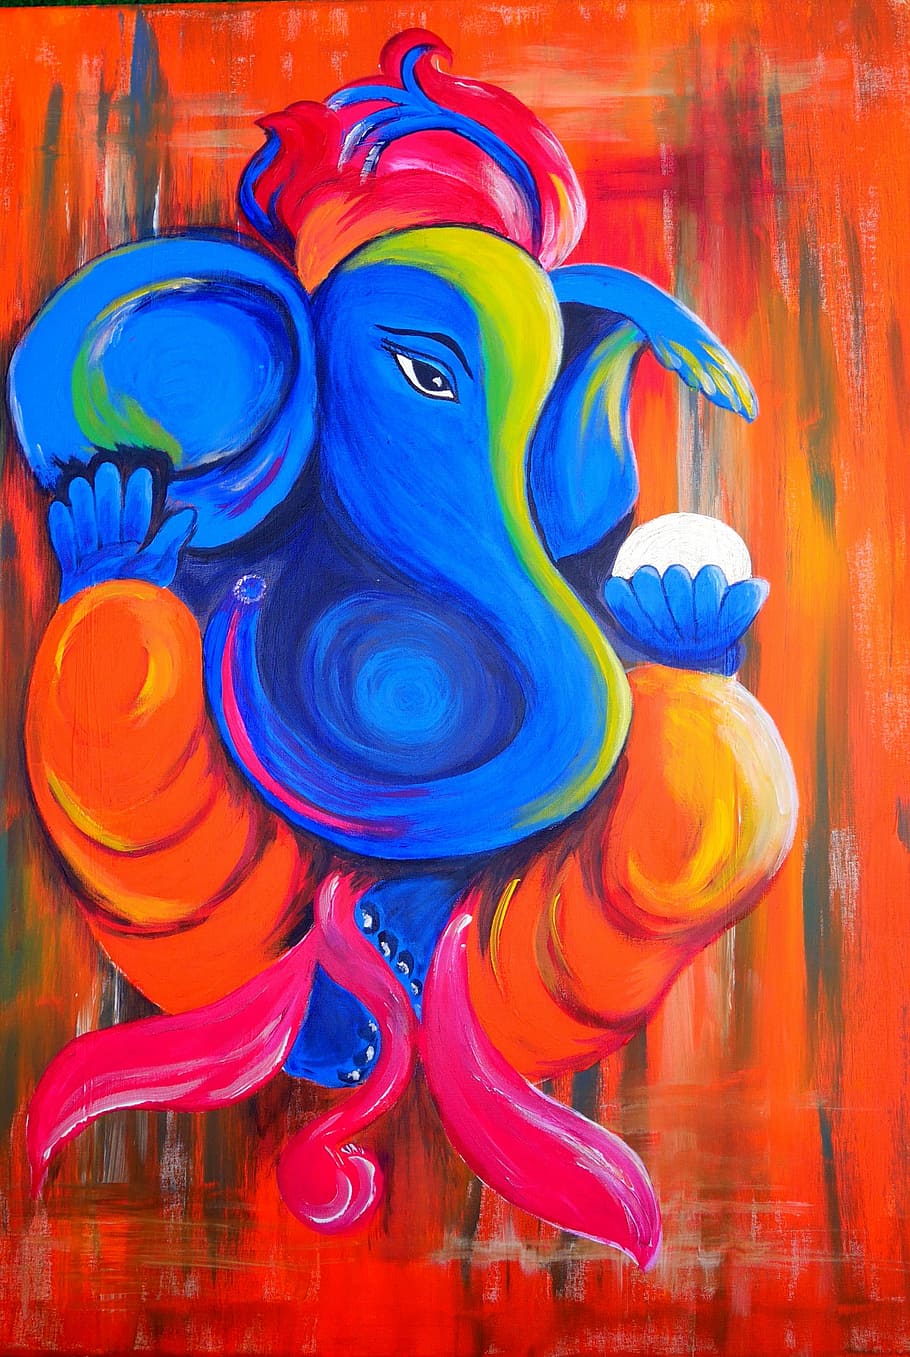 HD wallpaper: blue, yellow, red, and orange elephant painting ...